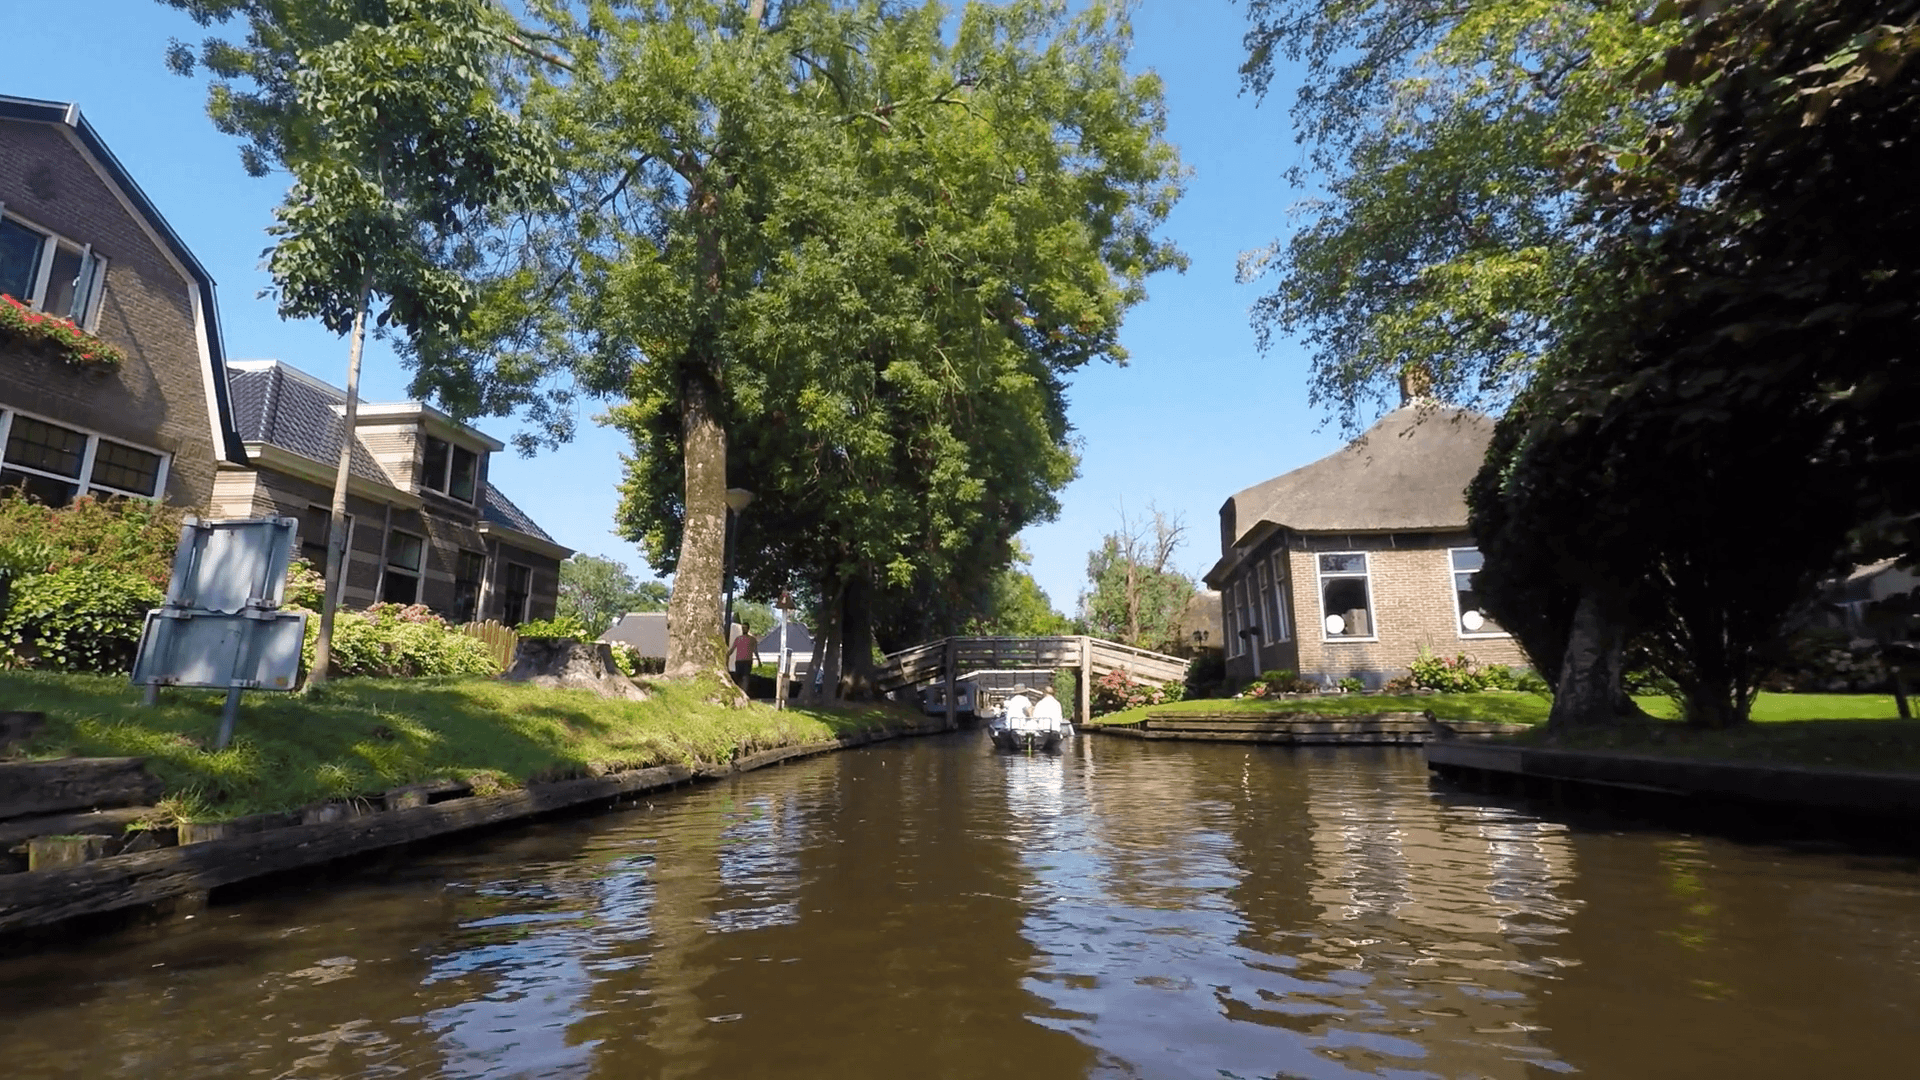 Motor boat ride in the main canal of the famous village of Giethoorn